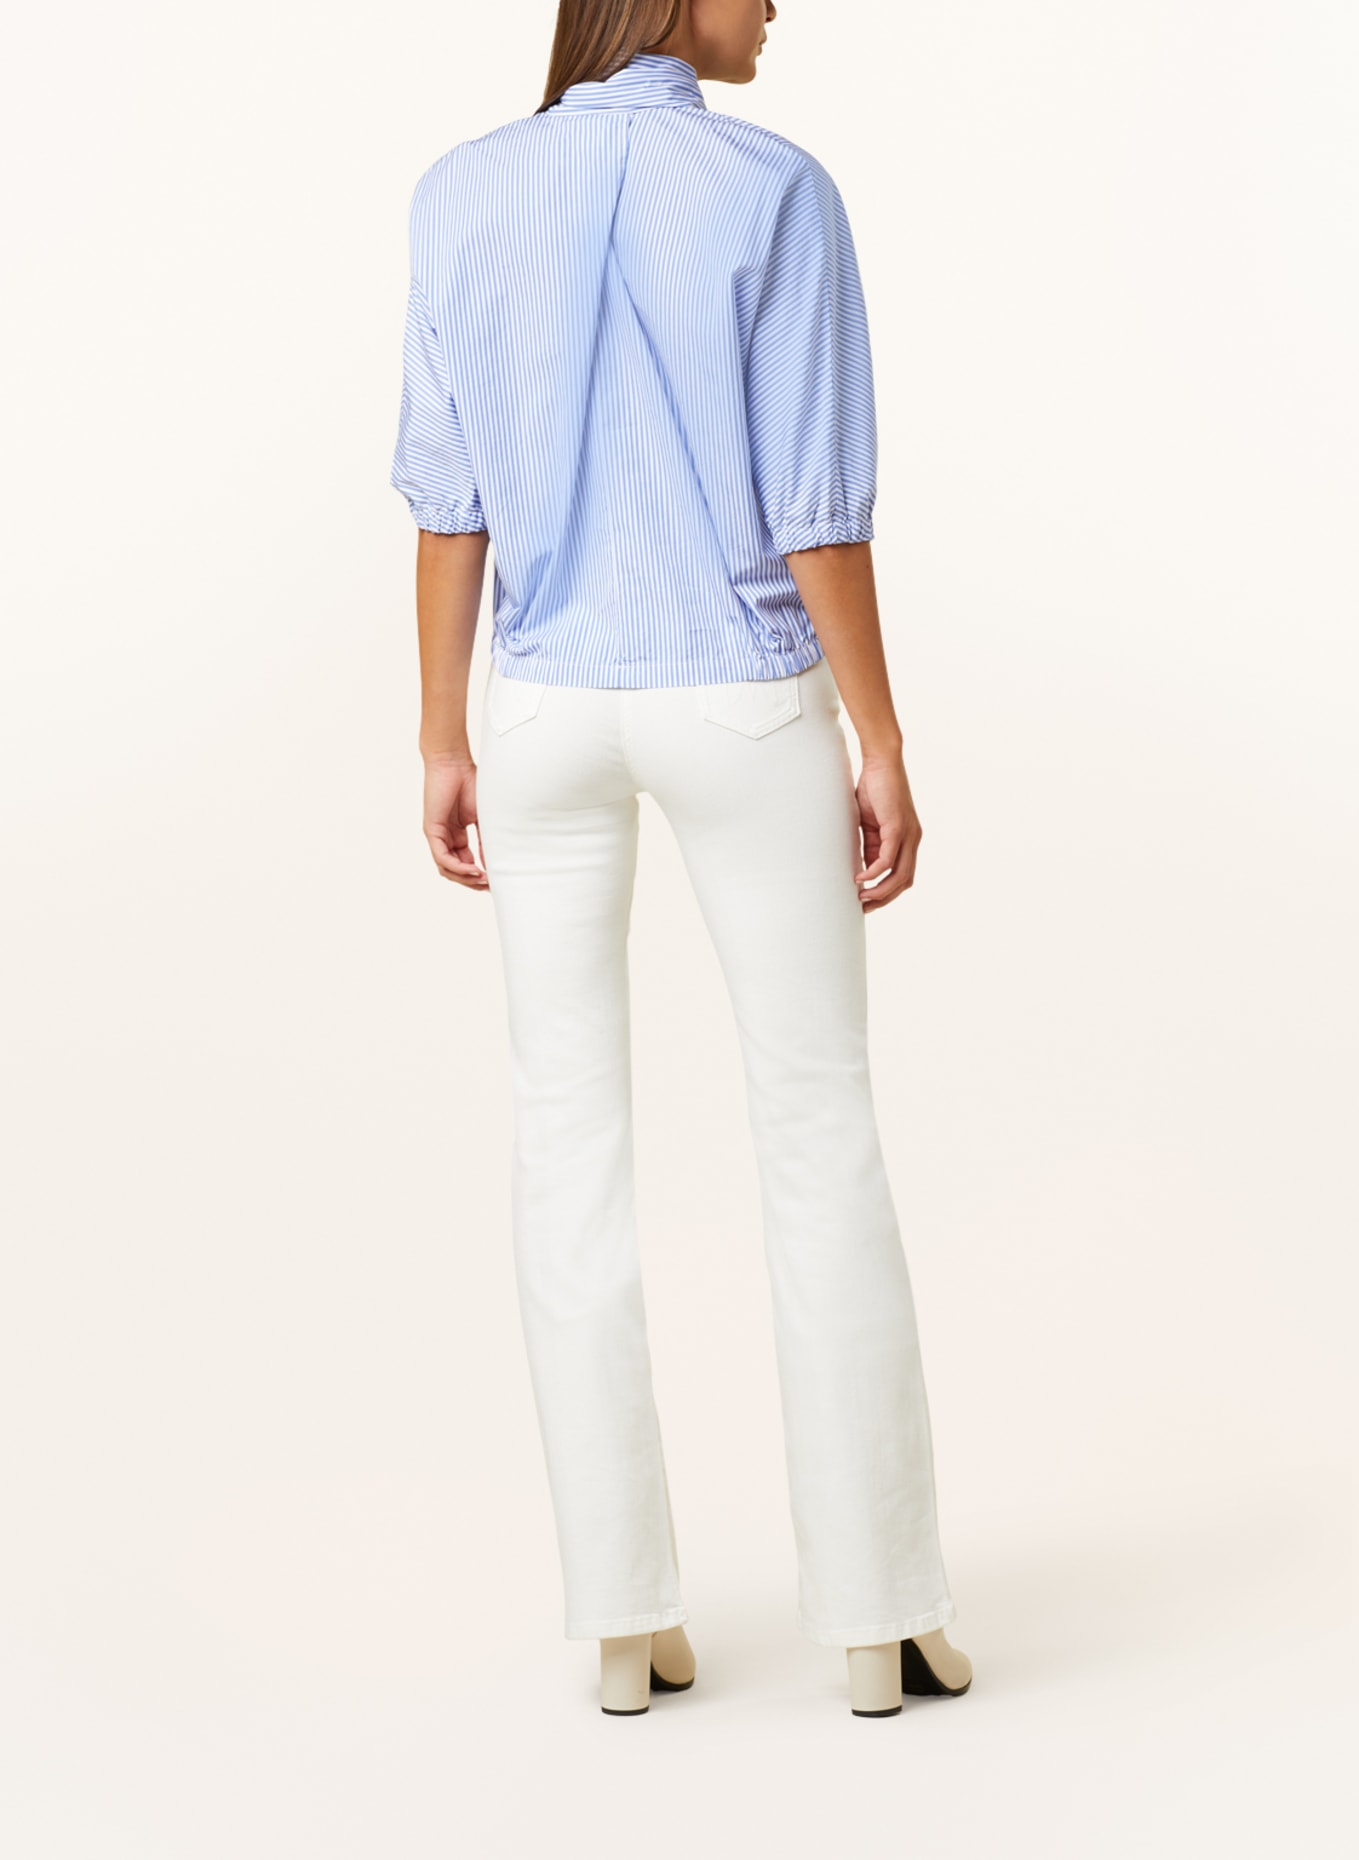 TONNO & PANNA Bow-tie blouse with 3/4 sleeves, Color: BLUE/ WHITE (Image 3)